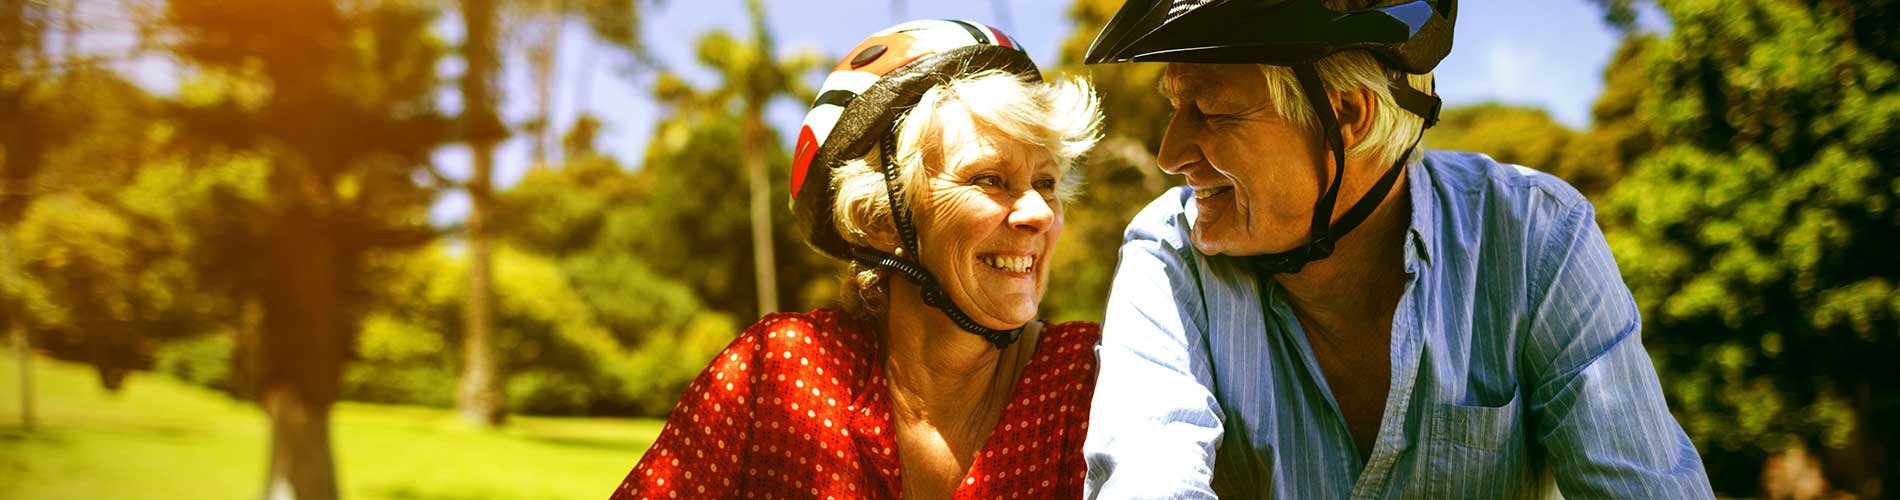 Senior couple smiling at each other on a bike ride